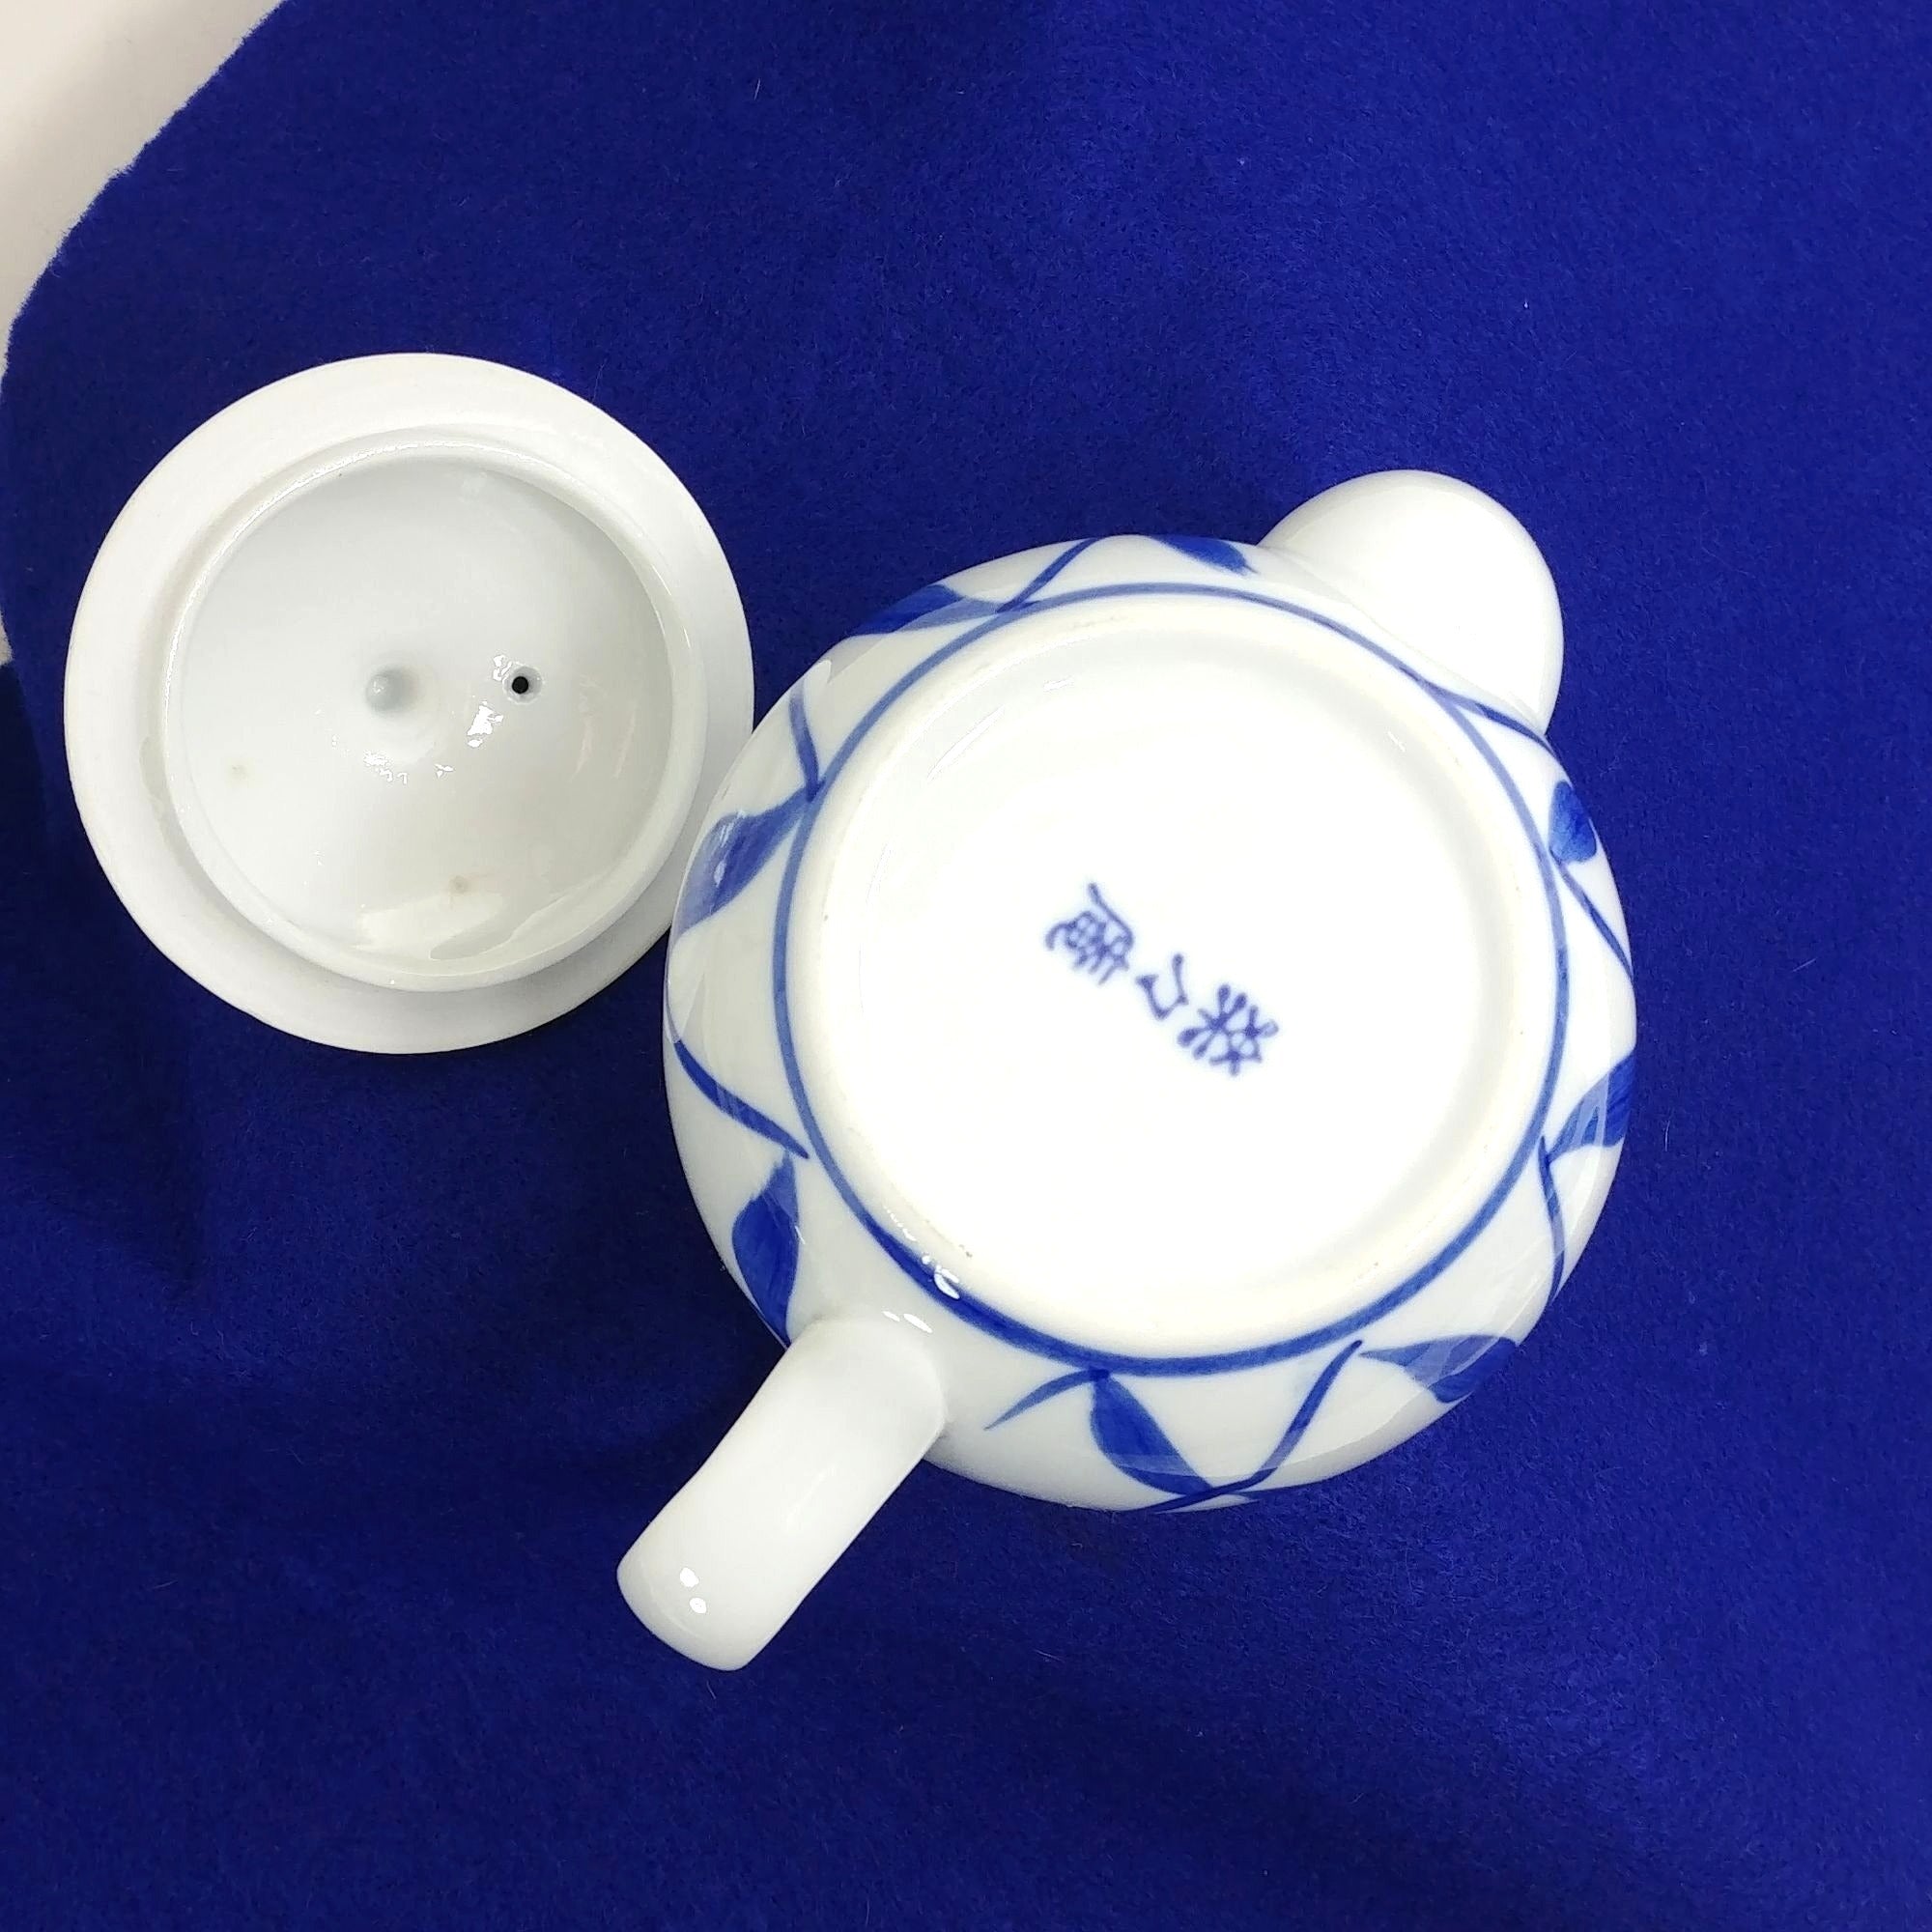 Asian Japanese Teapot with Lid Internal Metal Strainer Blue Trellis Chop Marked